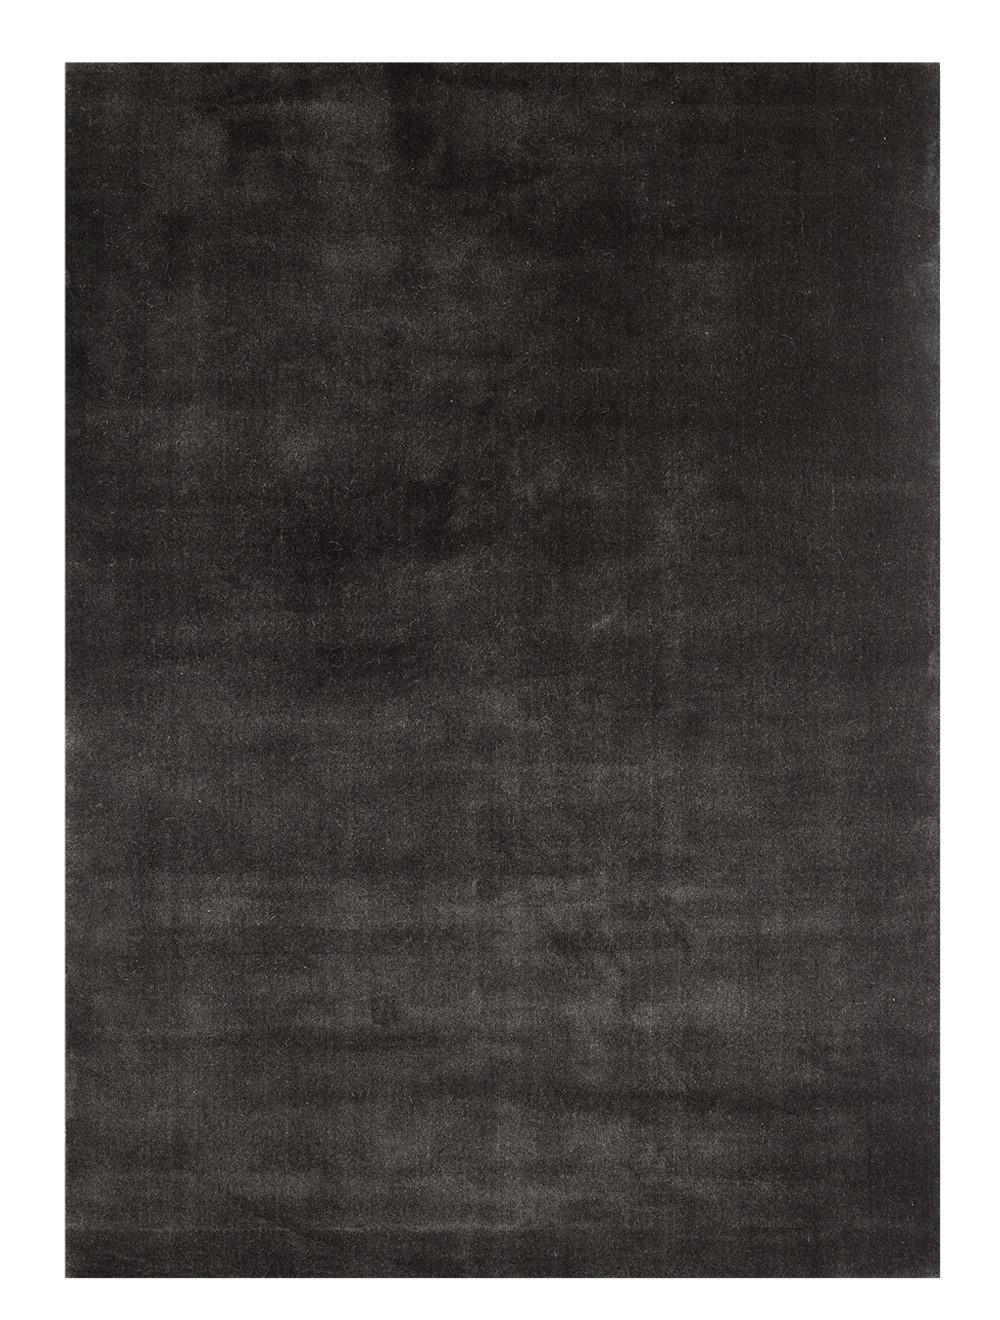 Charcoal Earth Bamboo Carpet by Massimo Copenhagen
Handwoven
Materials: 50% New Zealand Wool, 50% Bamboo
Dimensions: W 300 x H 400 cm
Available colors: Nougat Rose, Cashmere, Soft Grey, Concrete, Warm Grey, Mustard Yellow, Vibrant Blue, Camel,